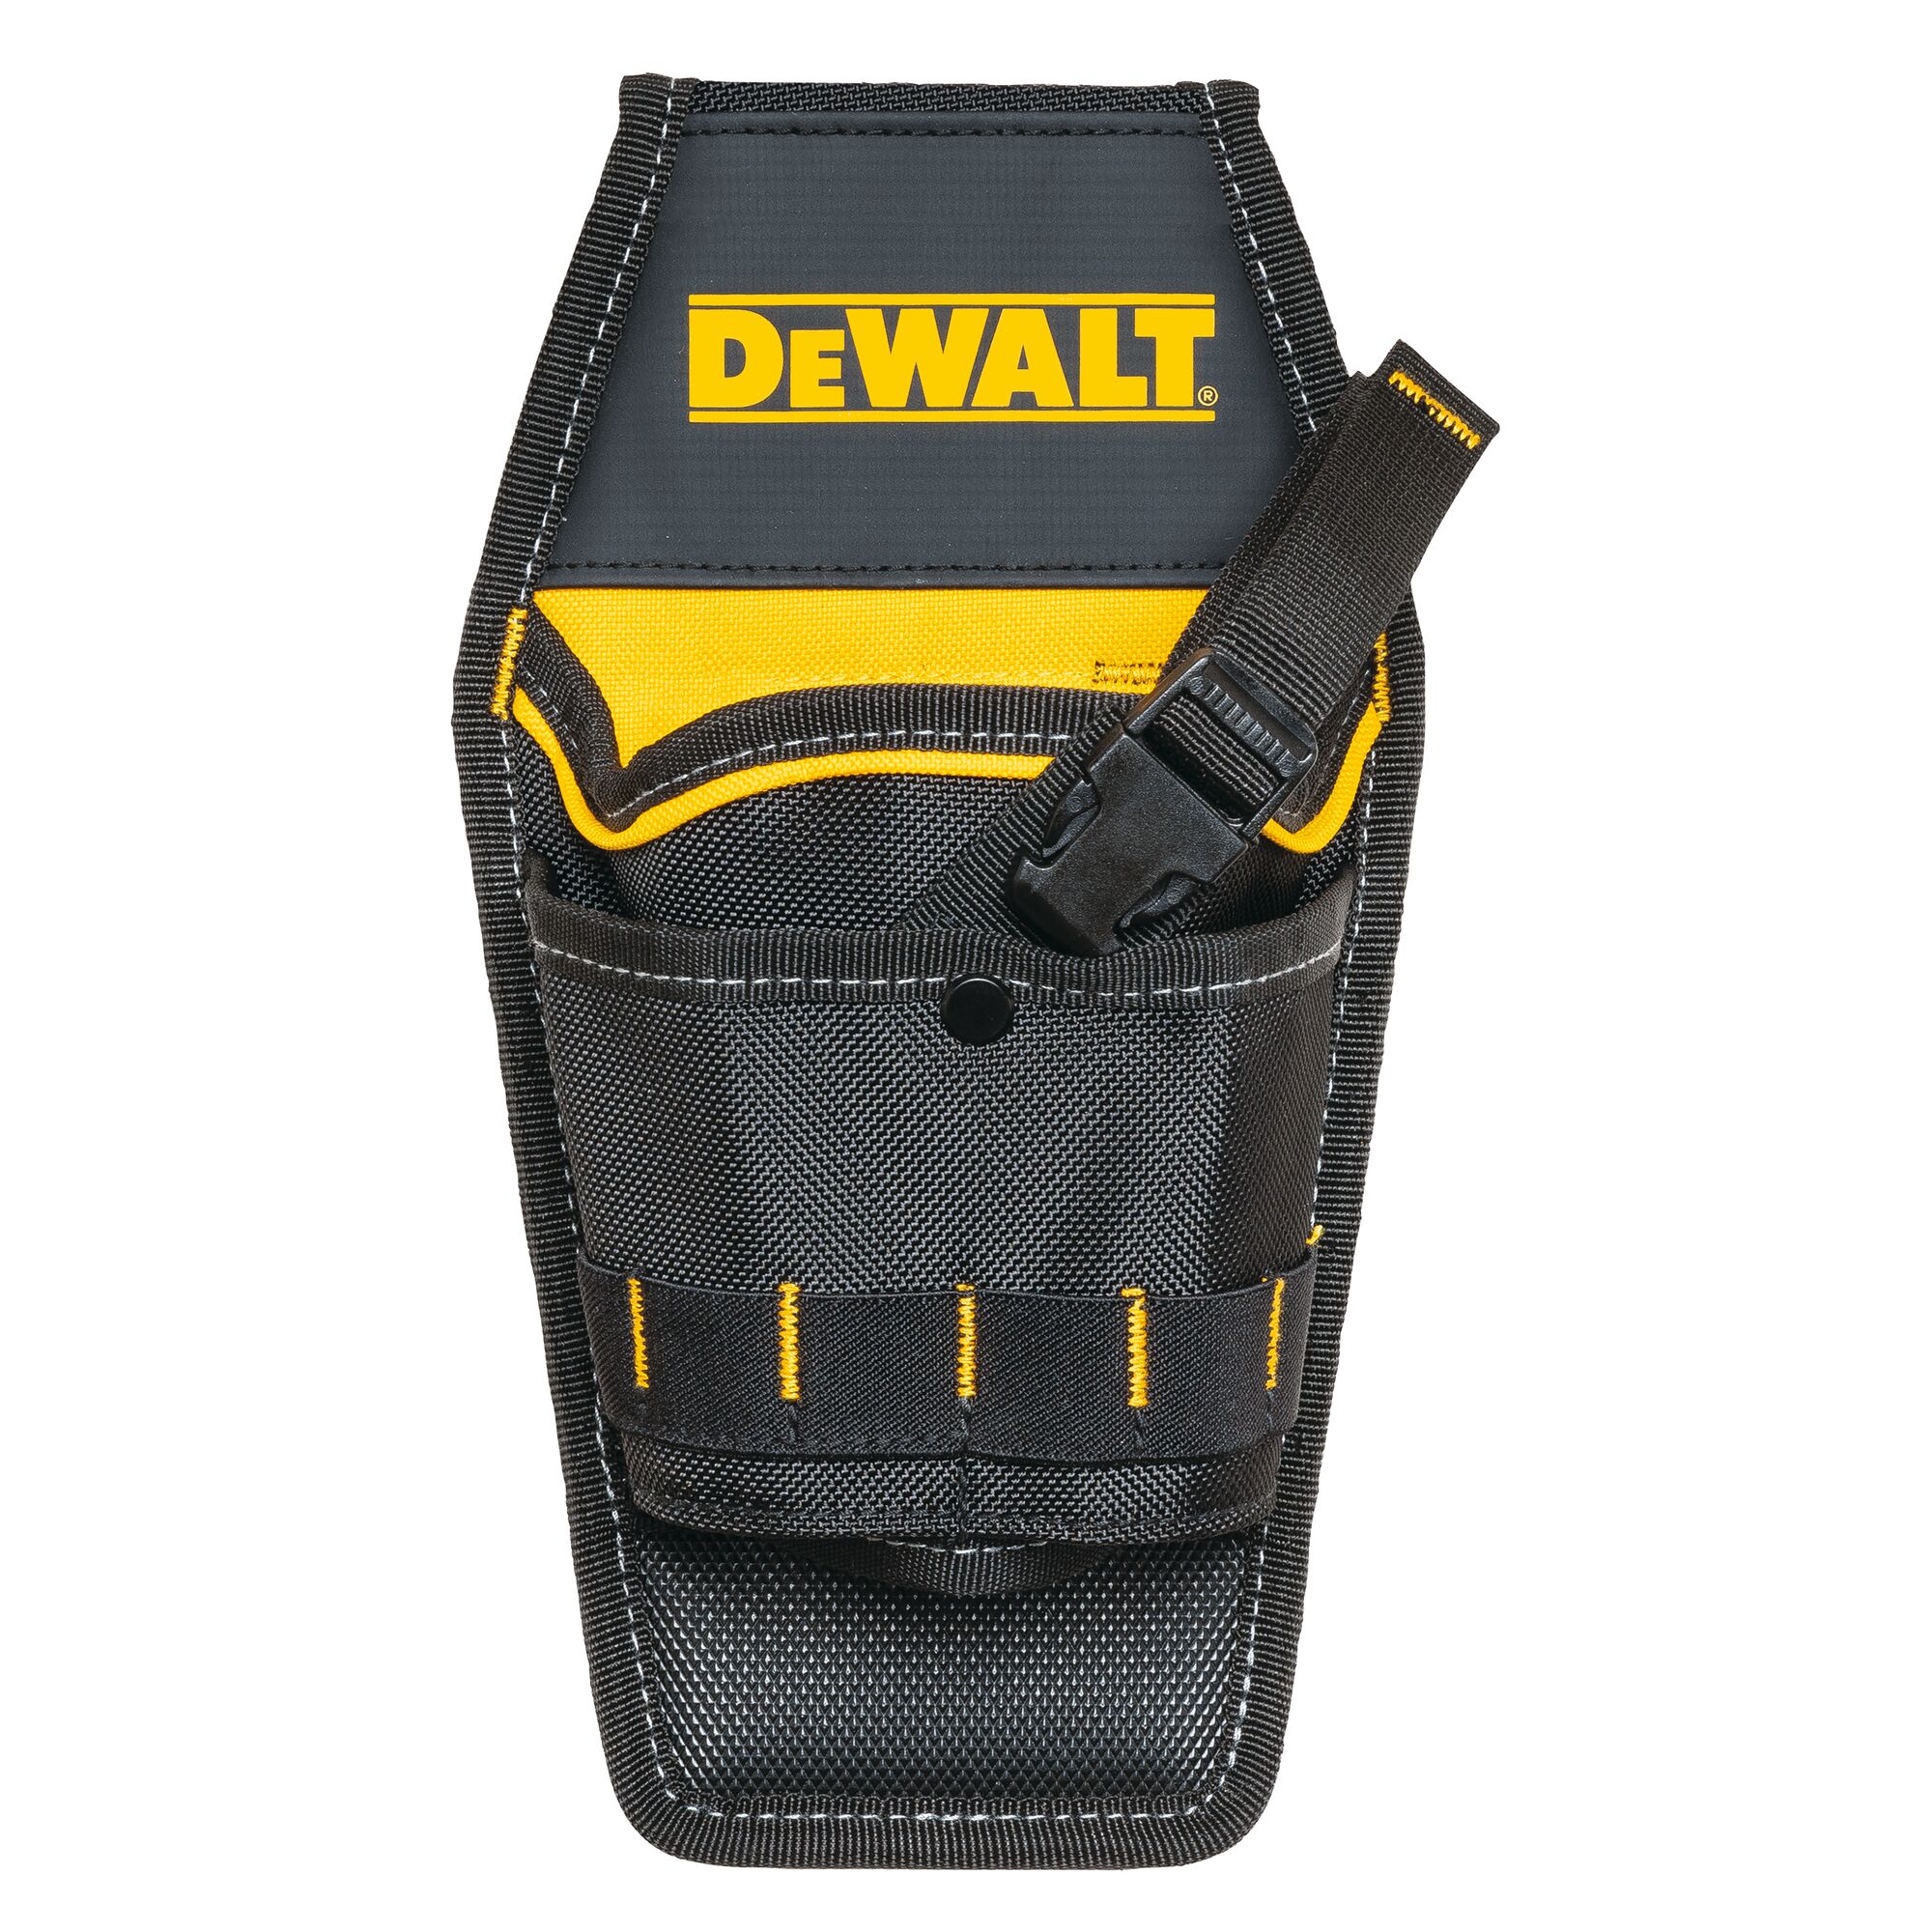 Total Customized Tool Holster. Fill your holster with your tools! Lock